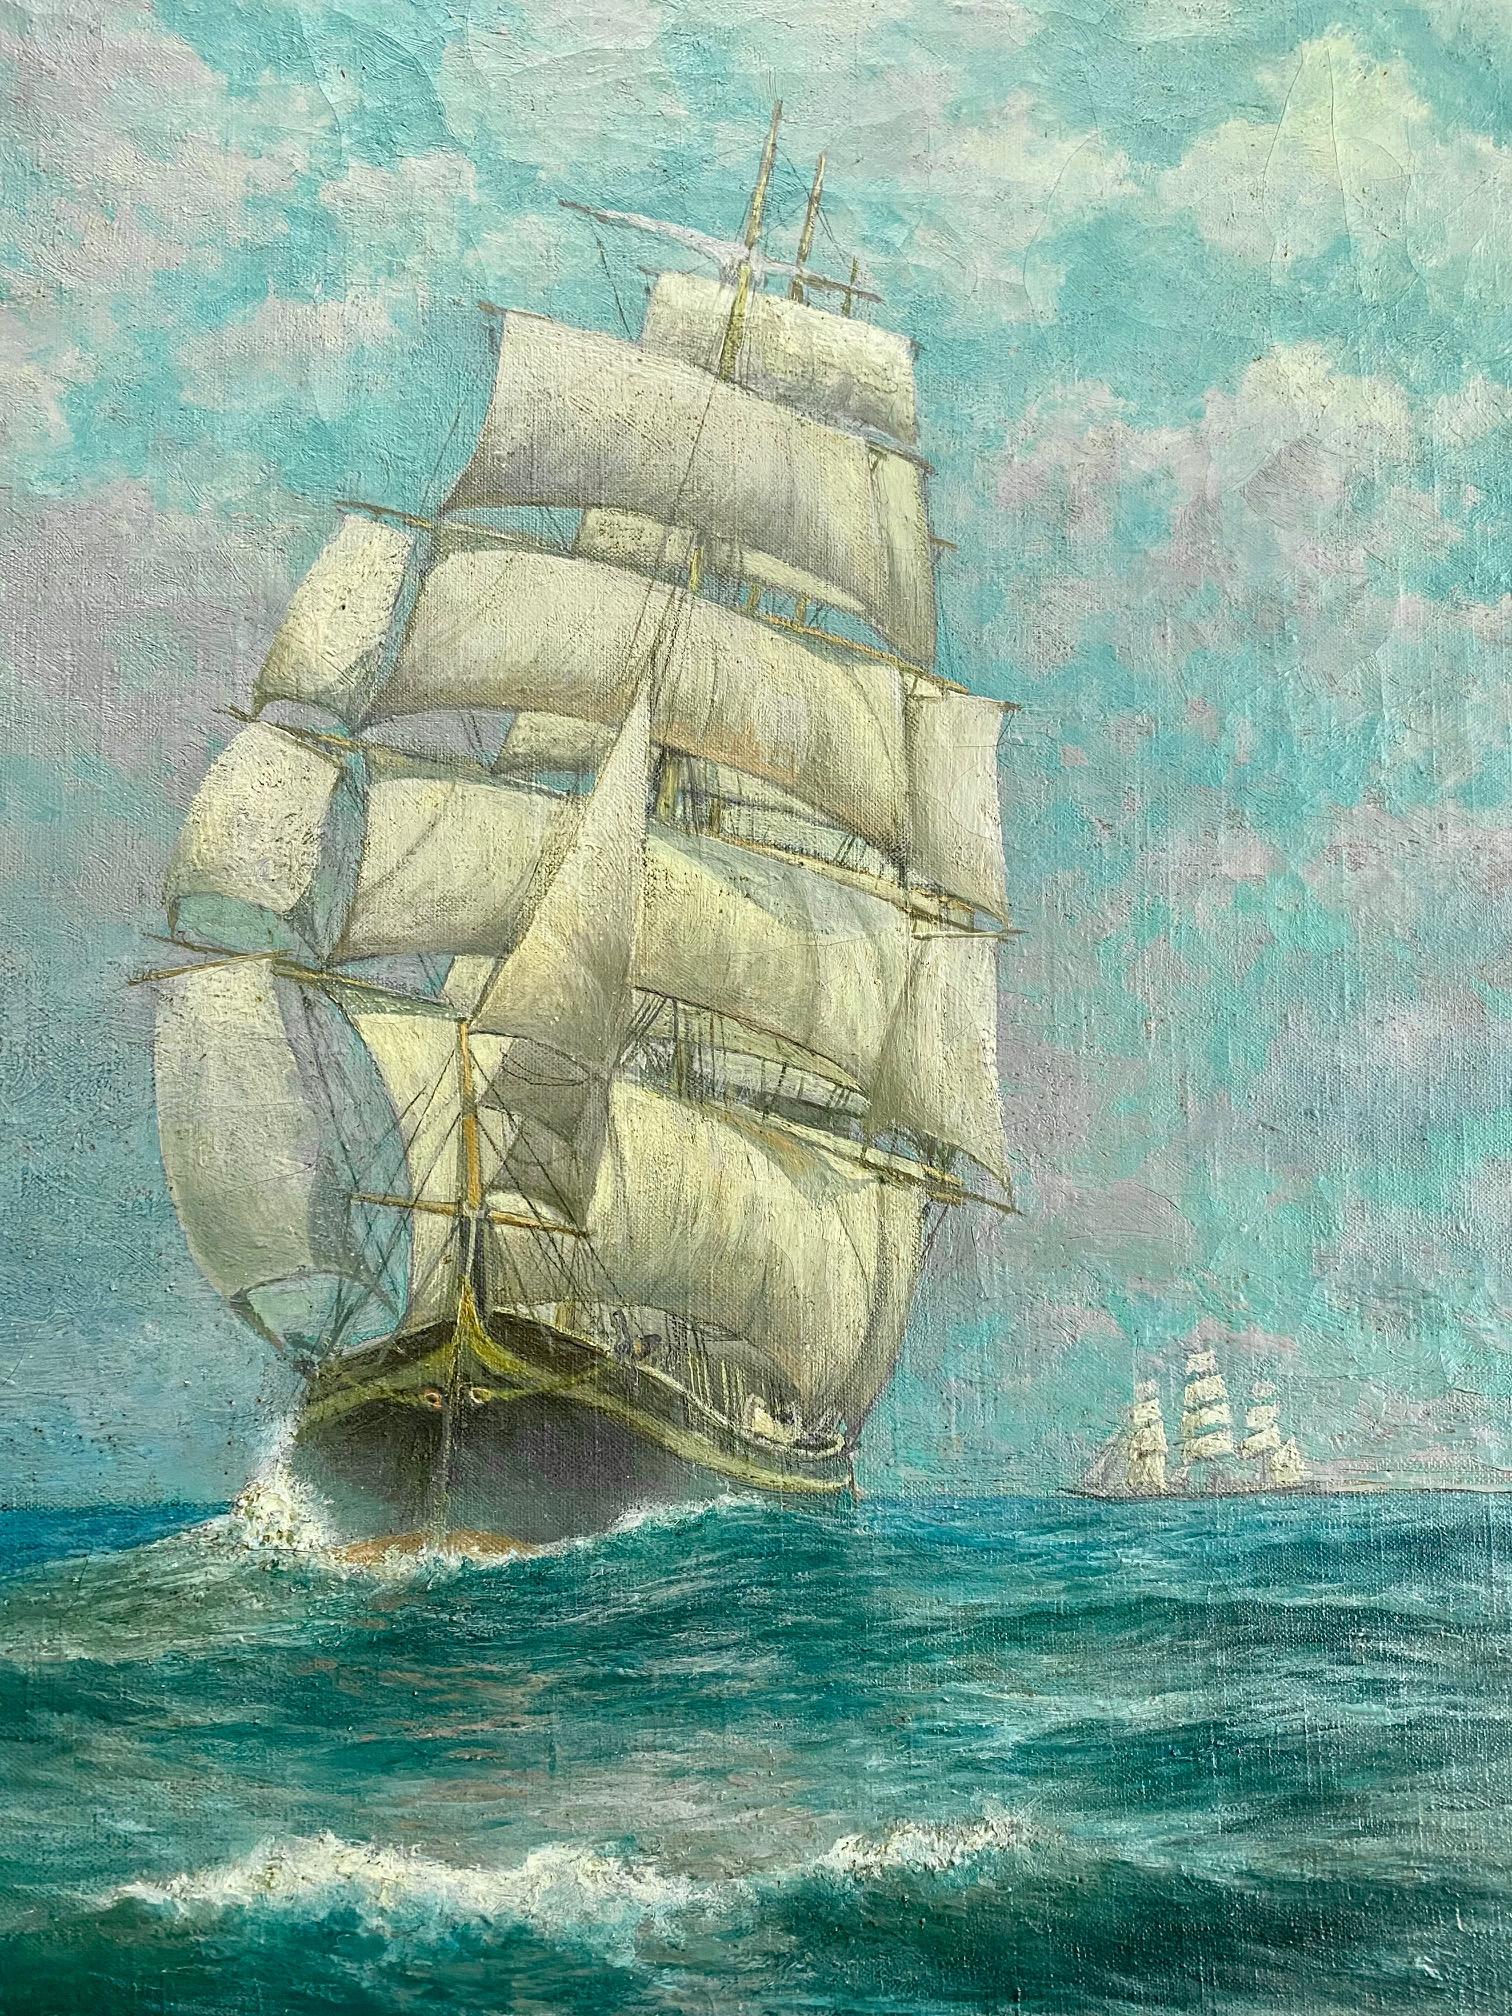 Seascape with Clippership by George Howell Gay (American: 1858 - 1931), circa 1890, an oil on canvas bow view of a clippership under full sail, running with stun'sls and skysails set, on lively sea under blue cloudy sky, with a second square-rigger